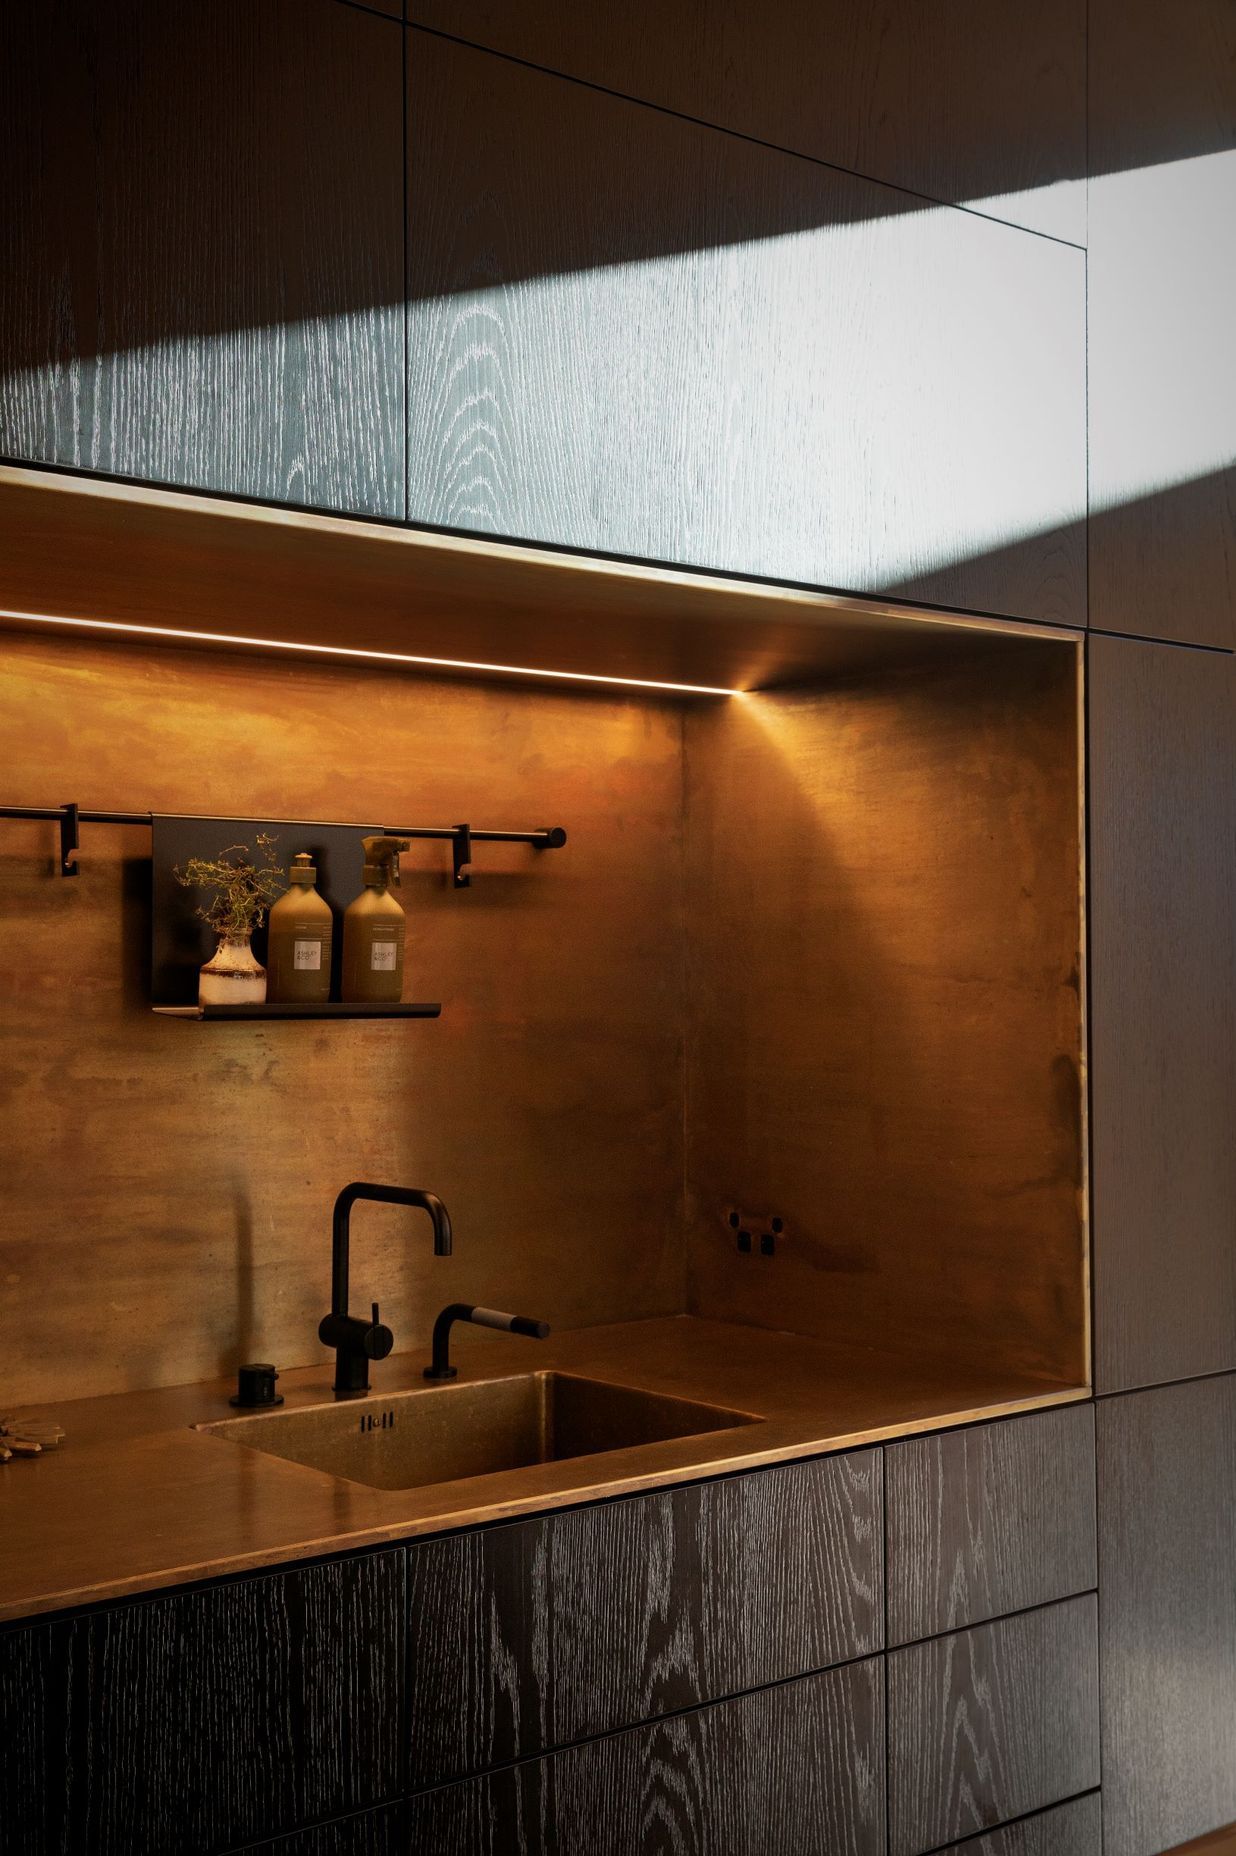 Prime Art Veneer Planked, Designed by Daniel Sullivan and Kate Loader of Architects' Creative, winner of Residential Kitchen Award at the Interior Awards 2020